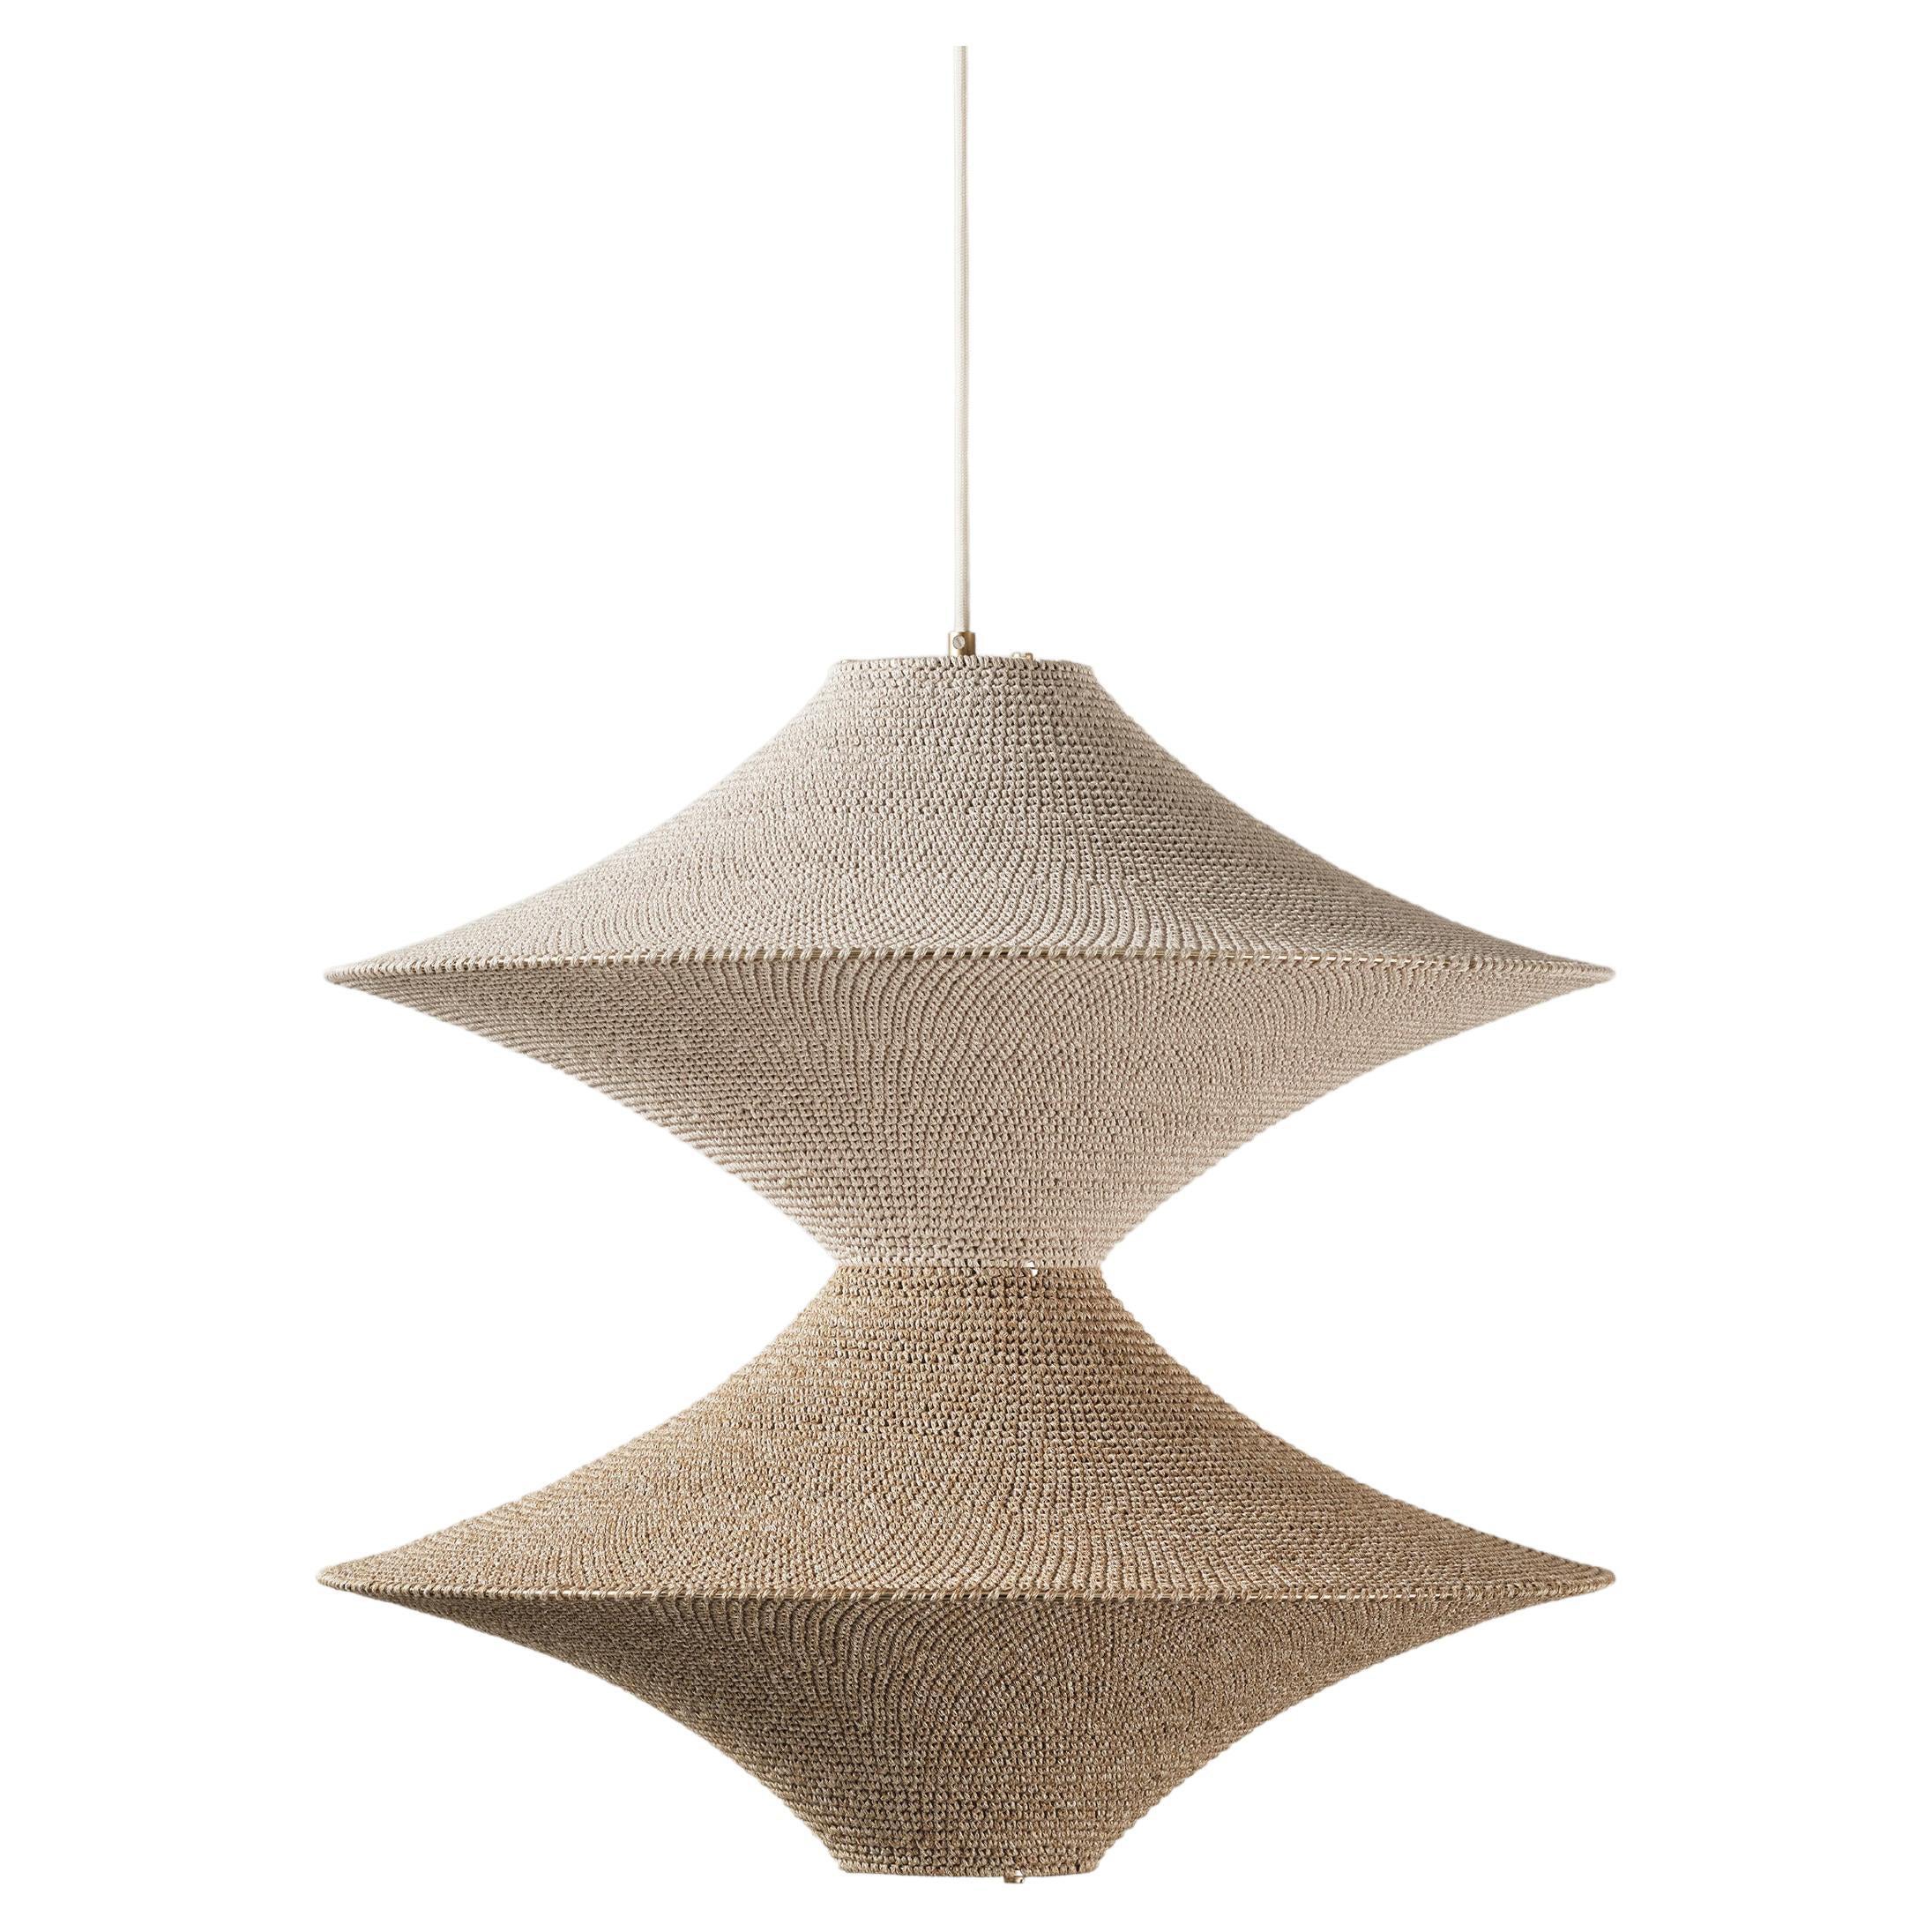 BAMBOO SOLITAIRE 02 Pendant Light Ø80cm/31.5in, Hand Crocheted in Bamboo Paper